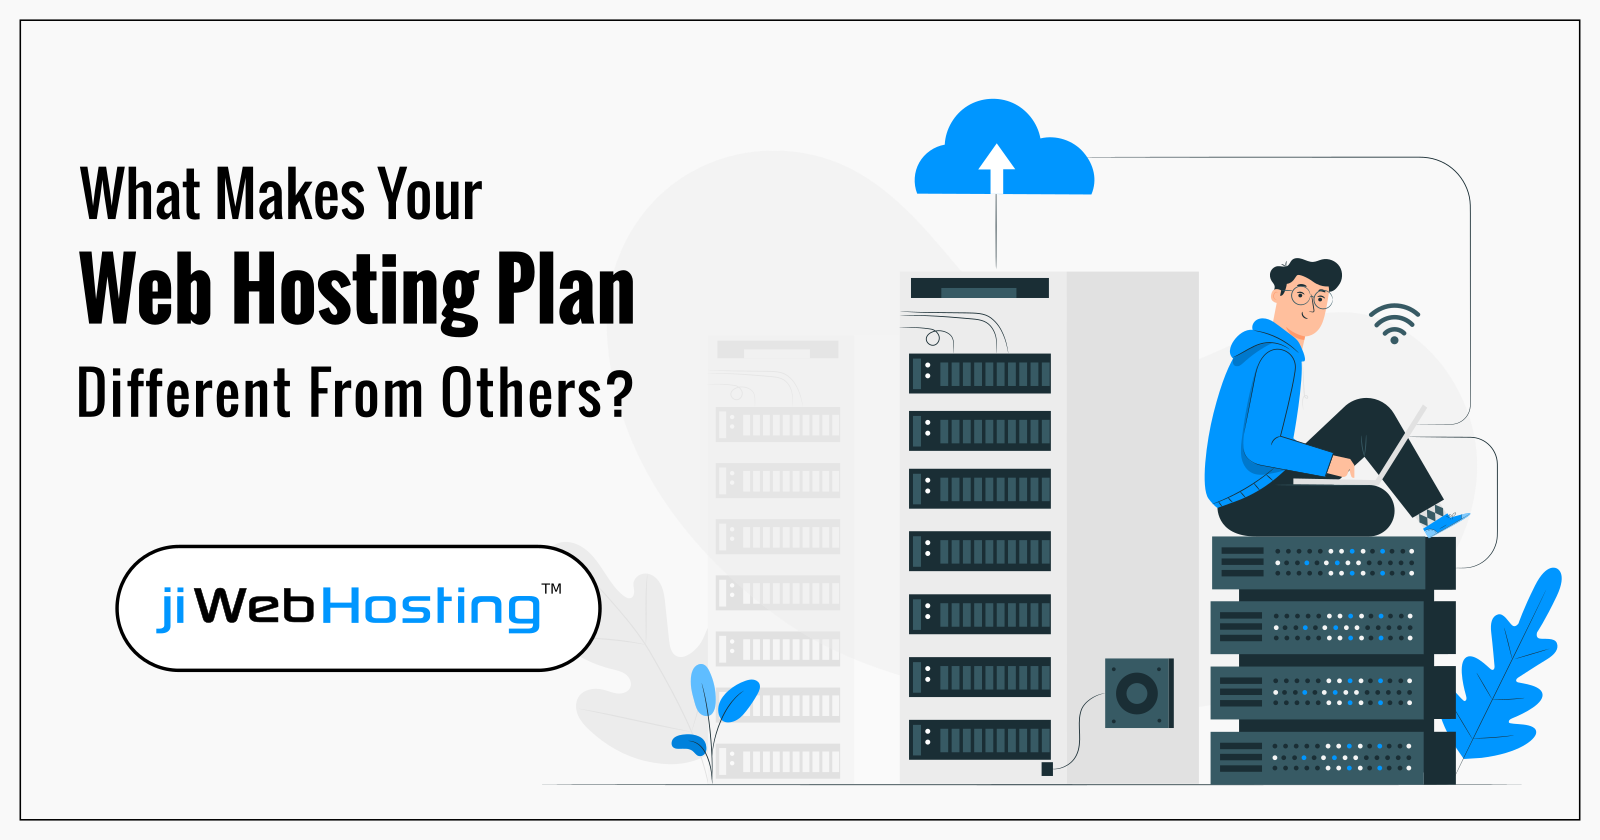 What Makes Your Web Hosting Plan Different From Others?